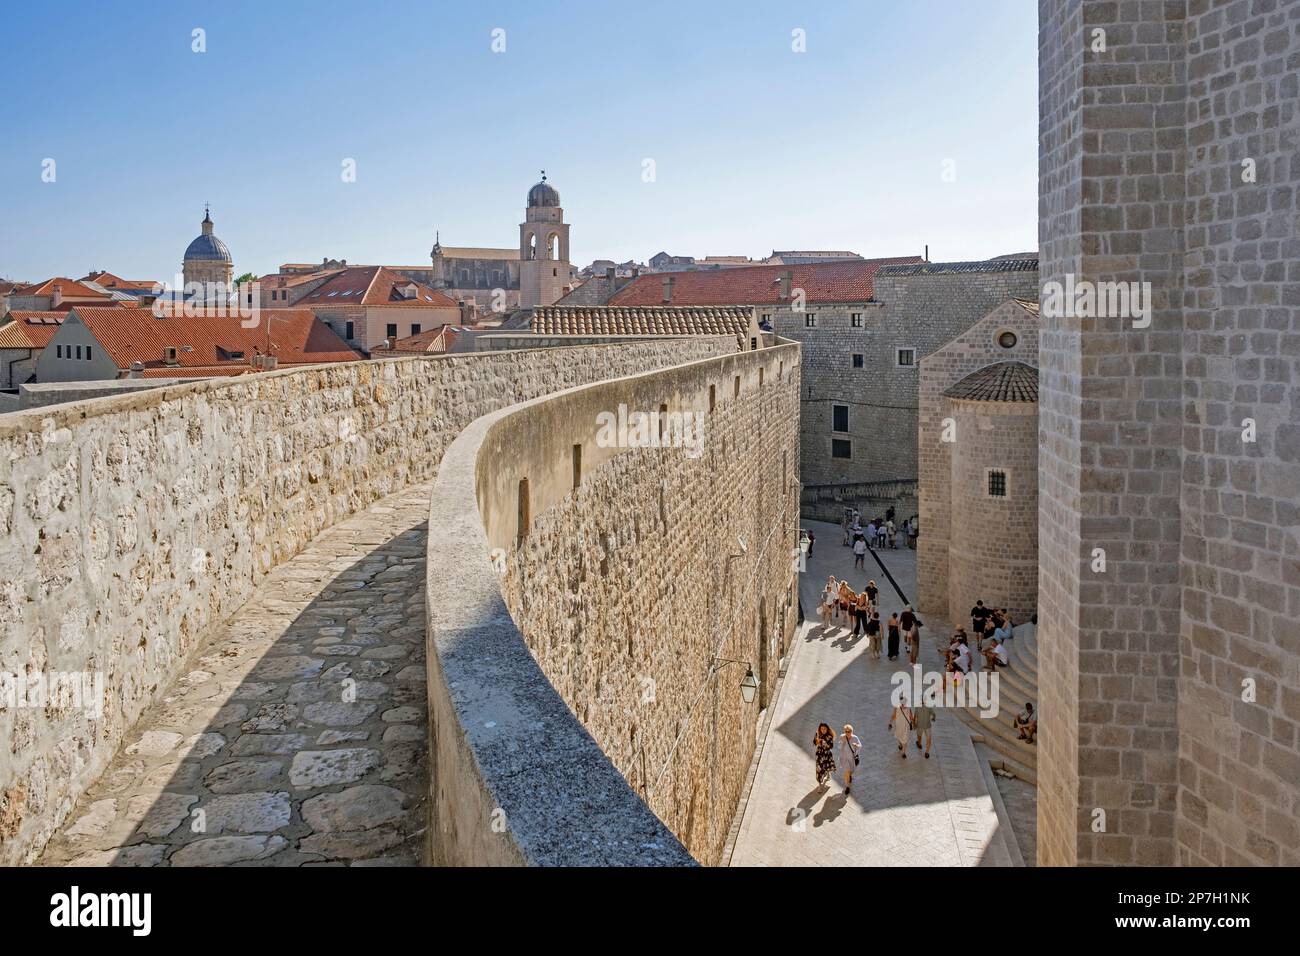 Medieval city walls / ramparts of the Old Town, historic city centre of Dubrovnik along the Adriatic Sea, southern Dalmatia, Croatia Stock Photo